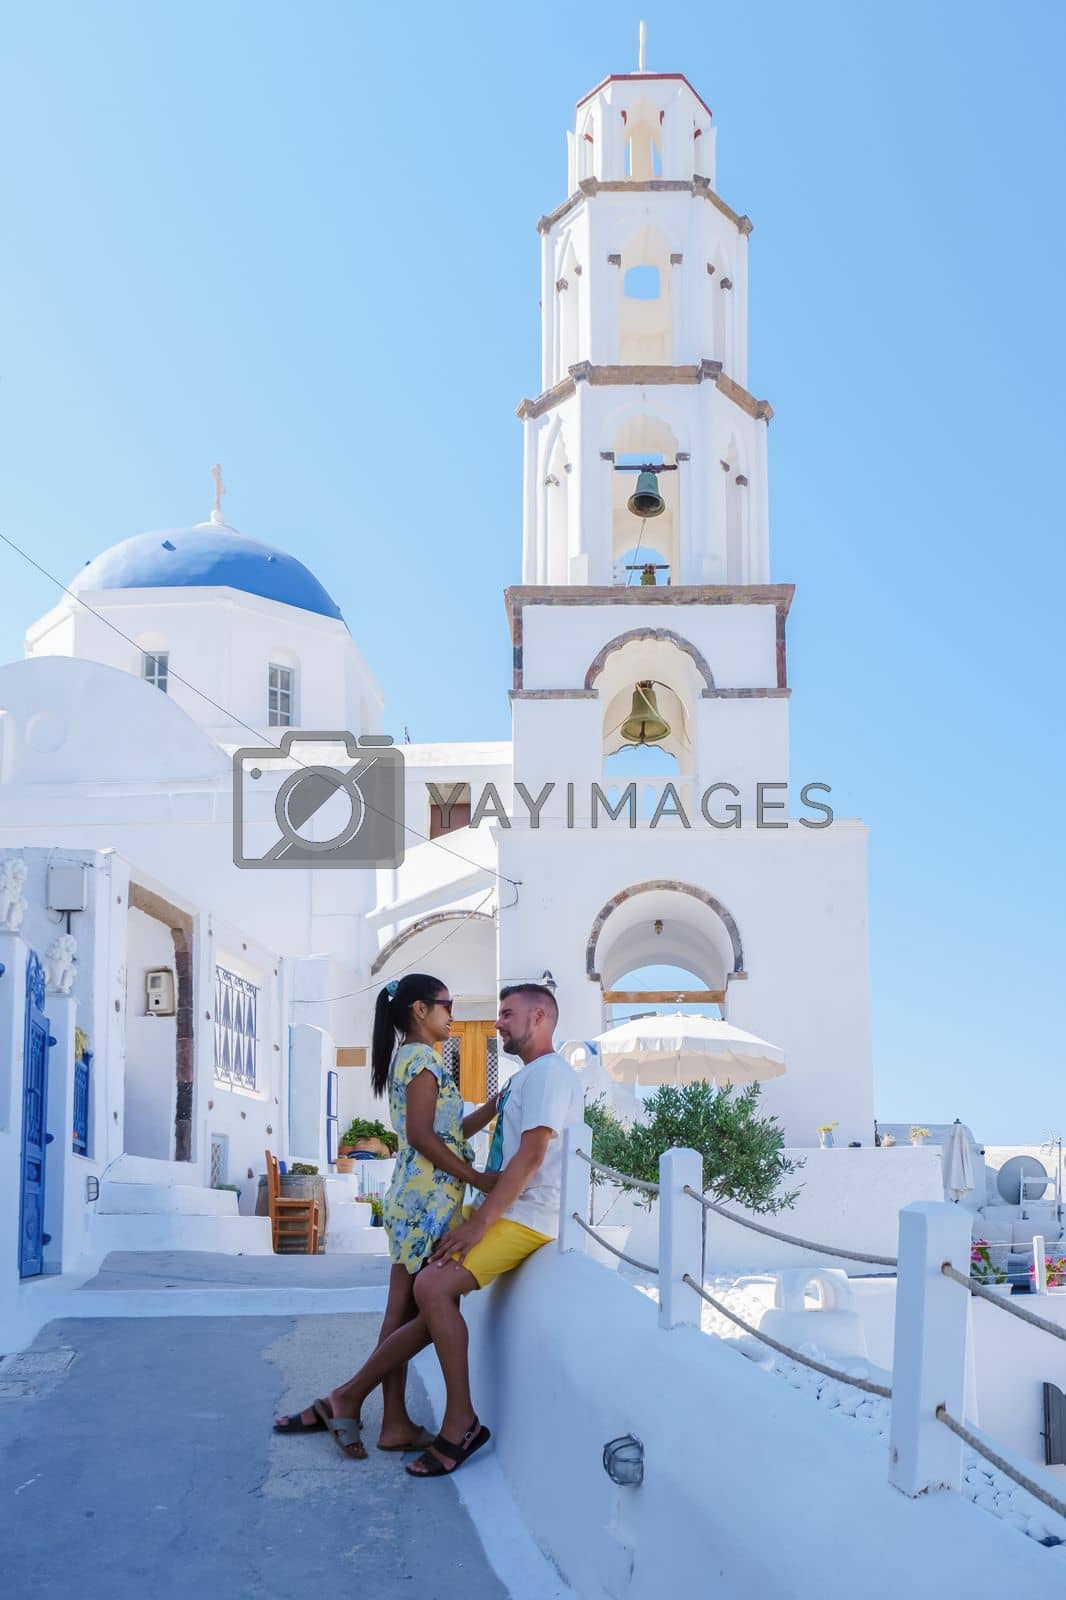 Royalty free image of Couple hugging and kissing on a romantic vacation in Santorini Greece, men and women visit Santorini by fokkebok